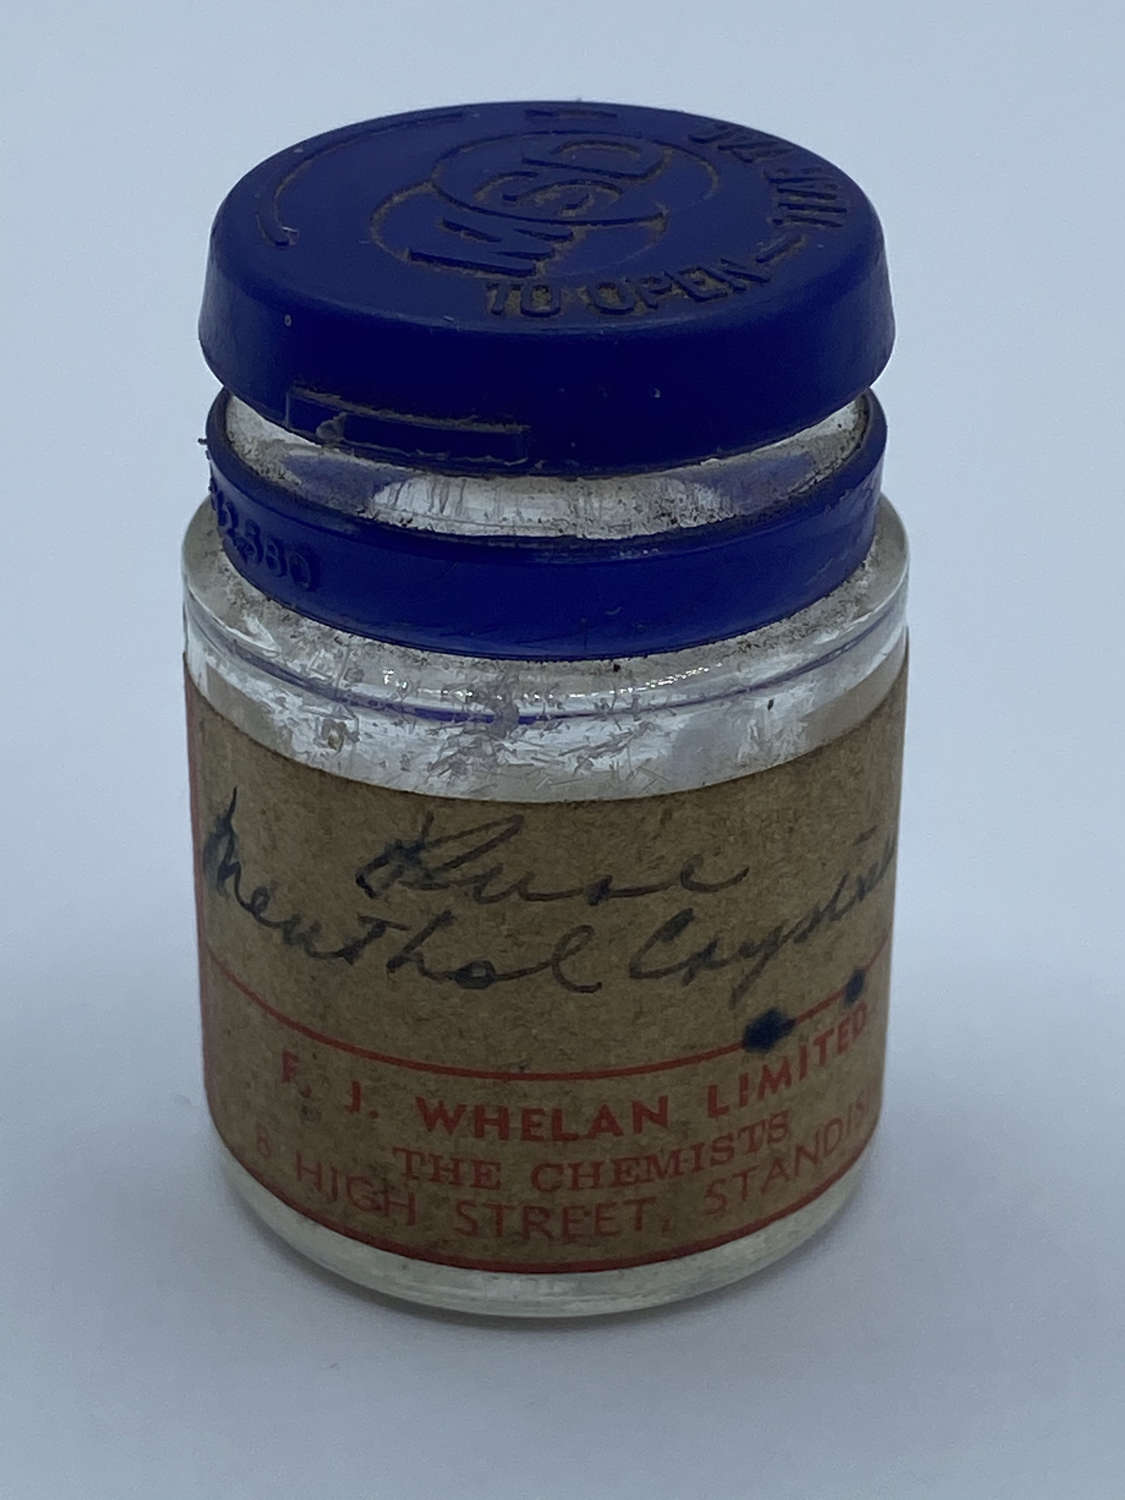 WW2 Home Front Chemist Pure Menthol Crystals Home Remedies Jar